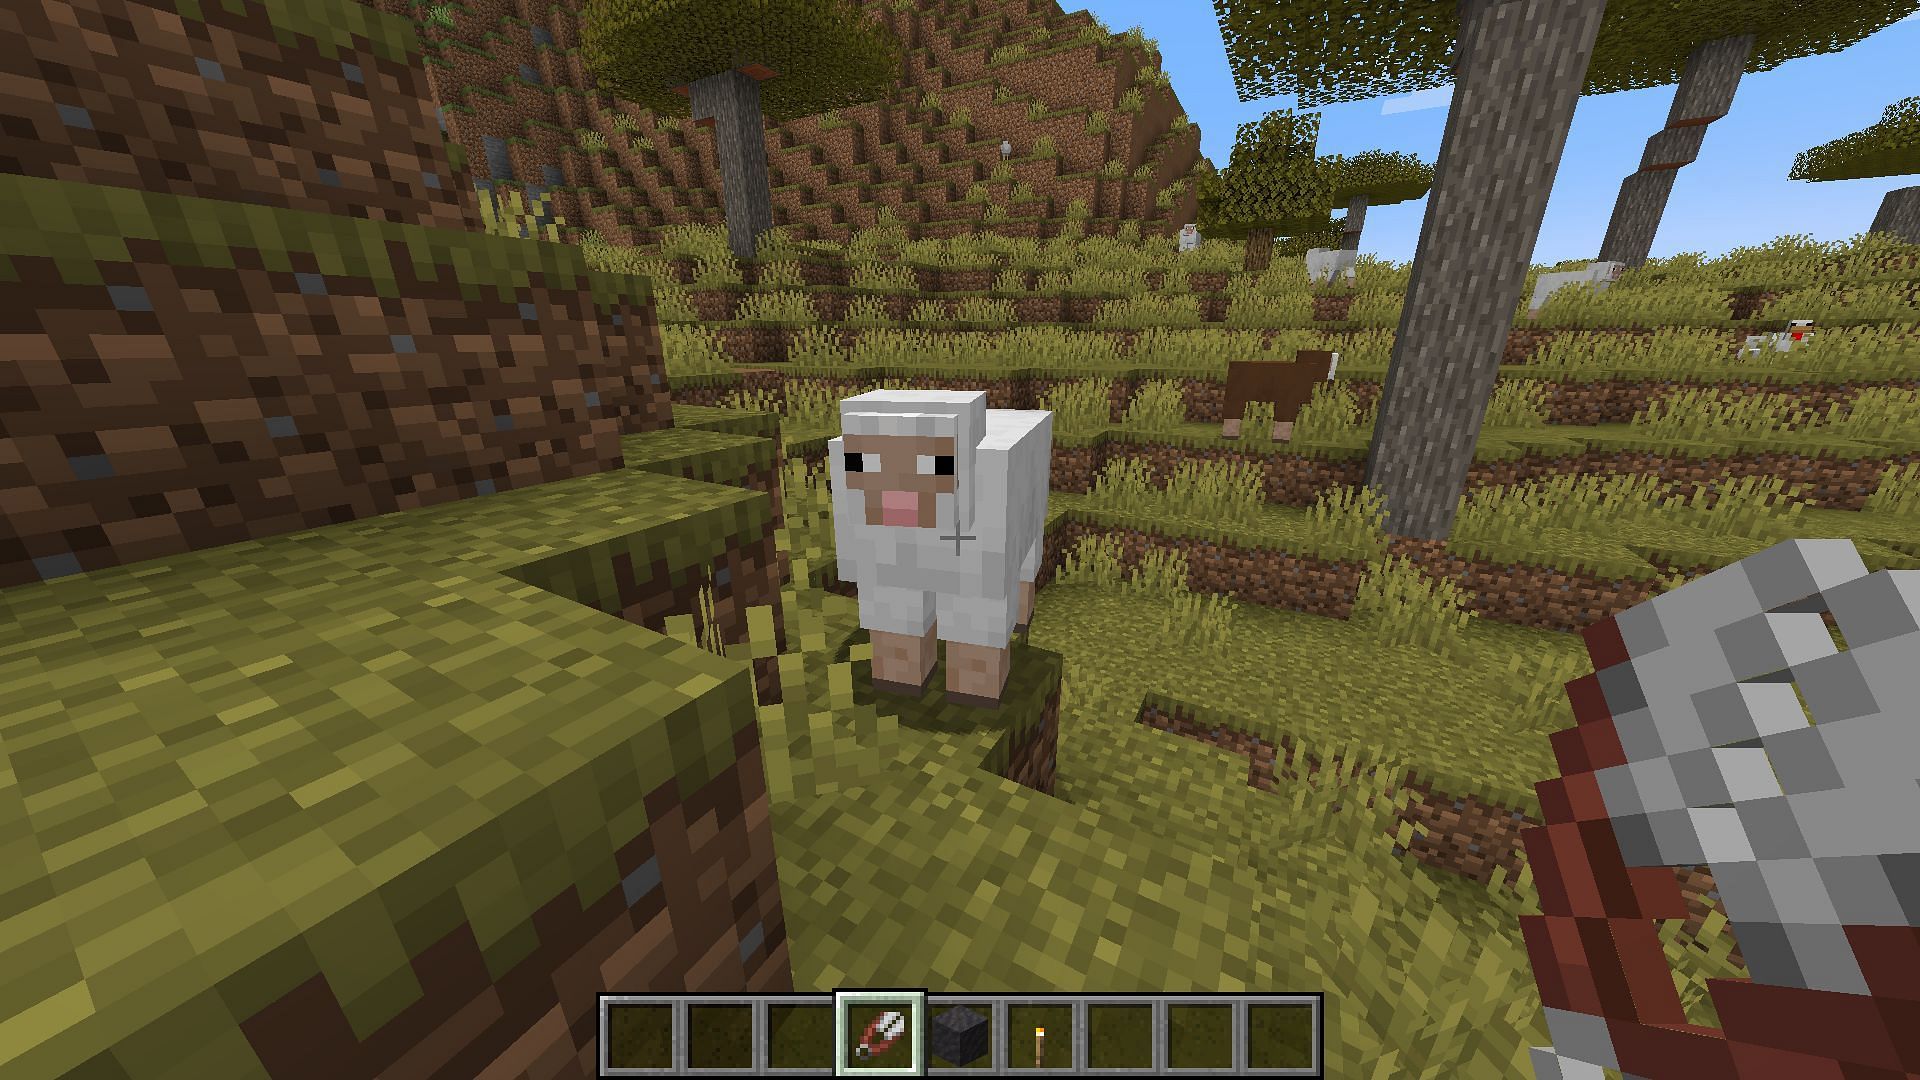 Shearing sheep is one of the main uses of this tool (Image via Minecraft 1.19)